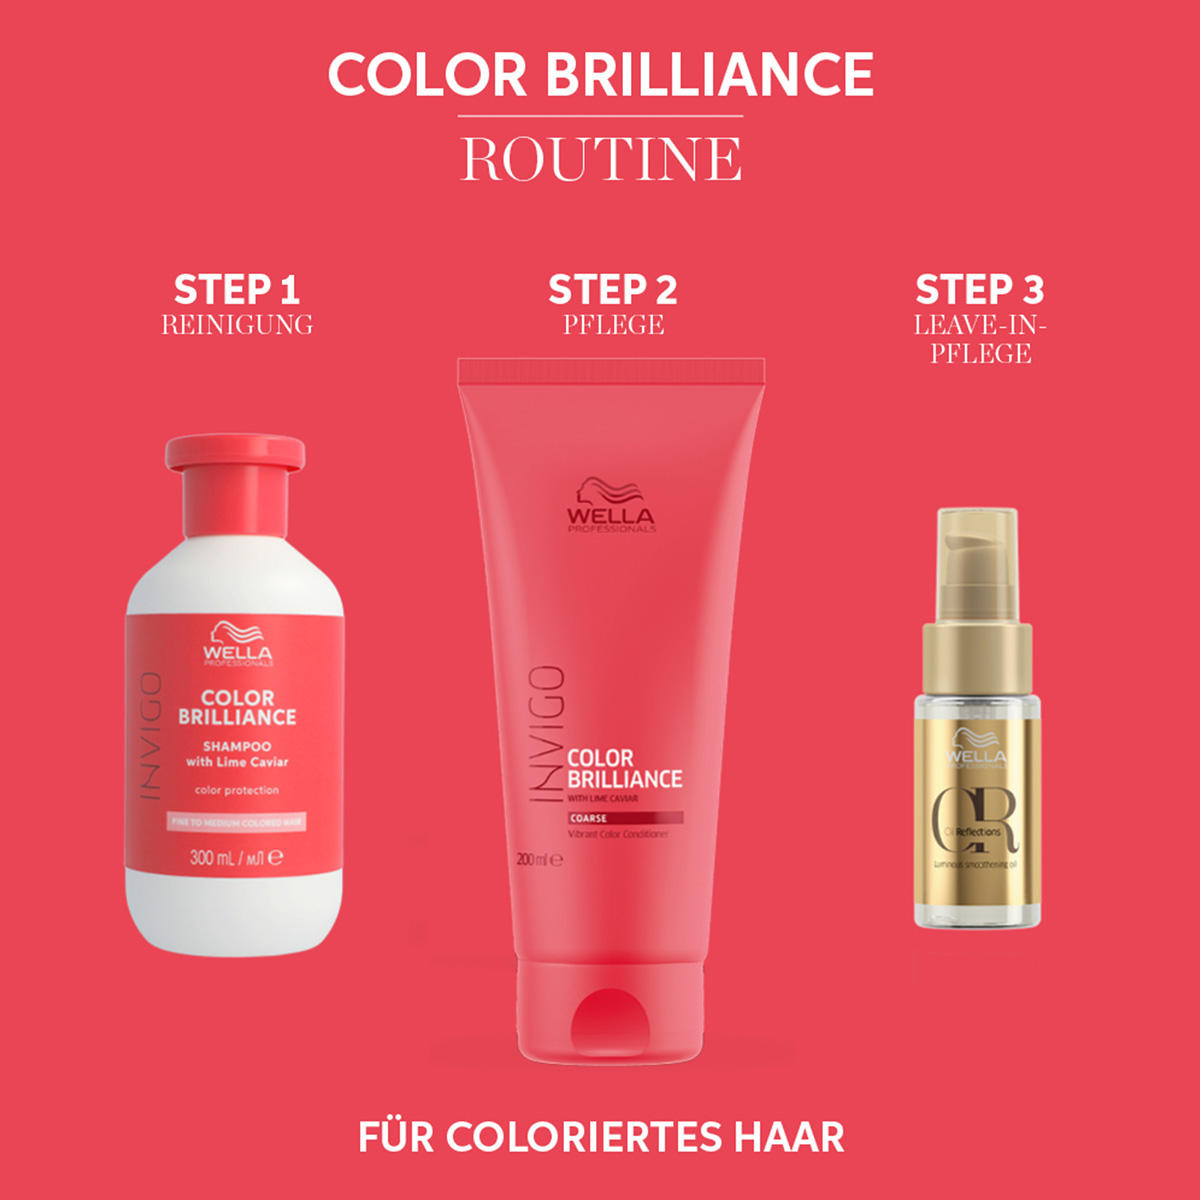 Wella Color Brilliance gift box for colored hair  - 3